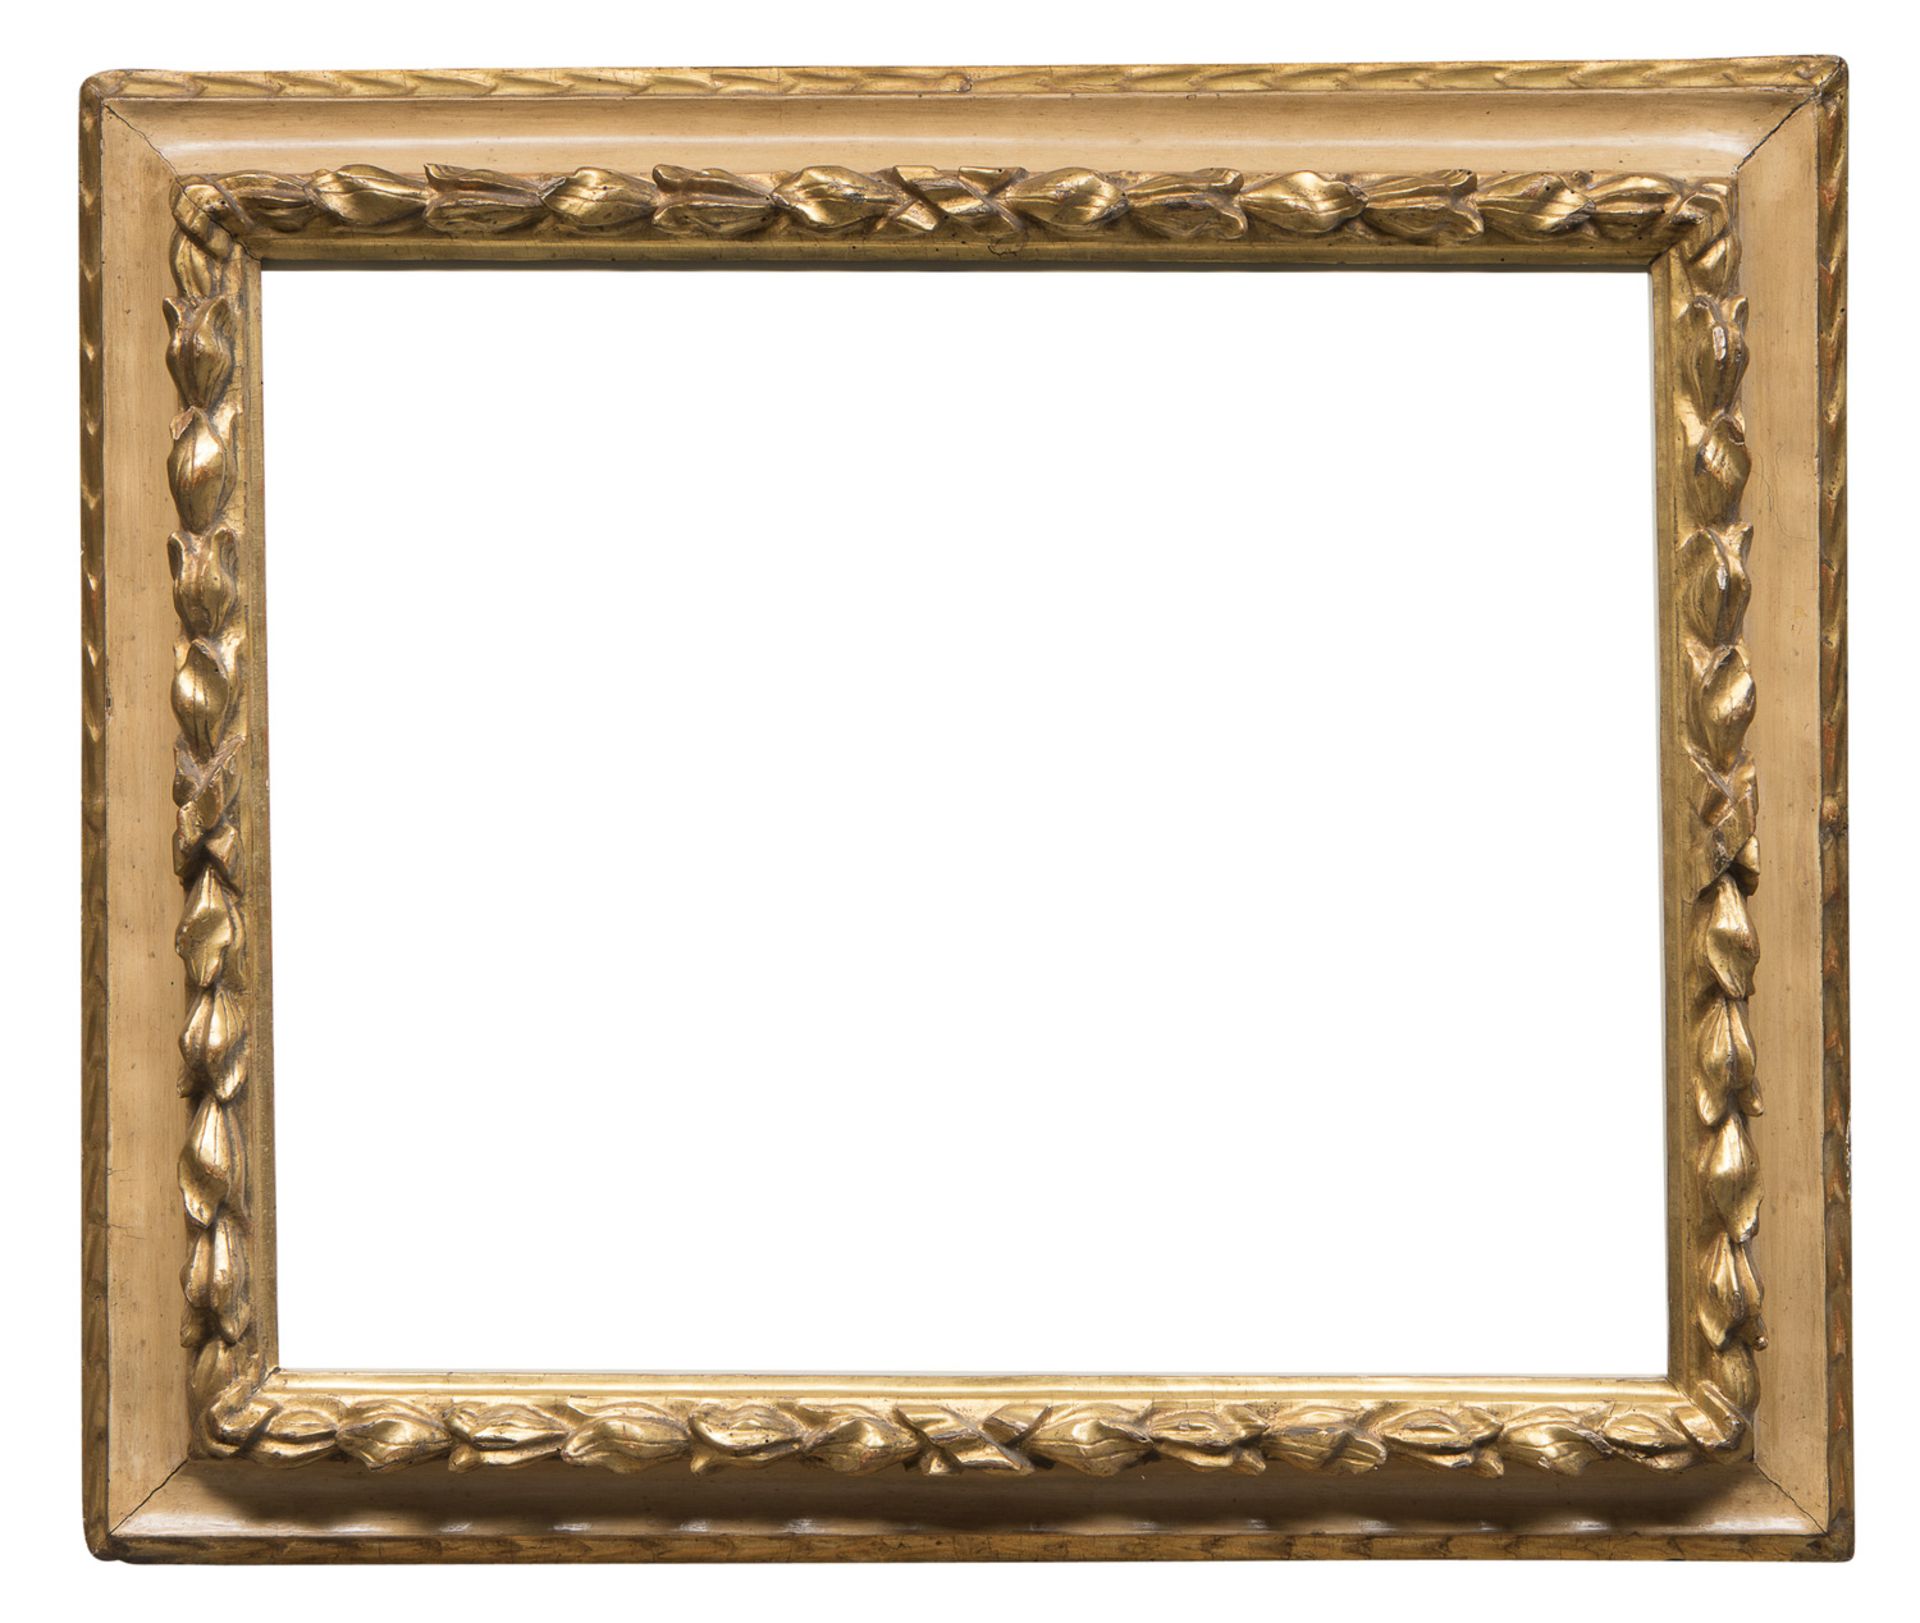 LACQUERED WOOD FRAME 17th CENTURY